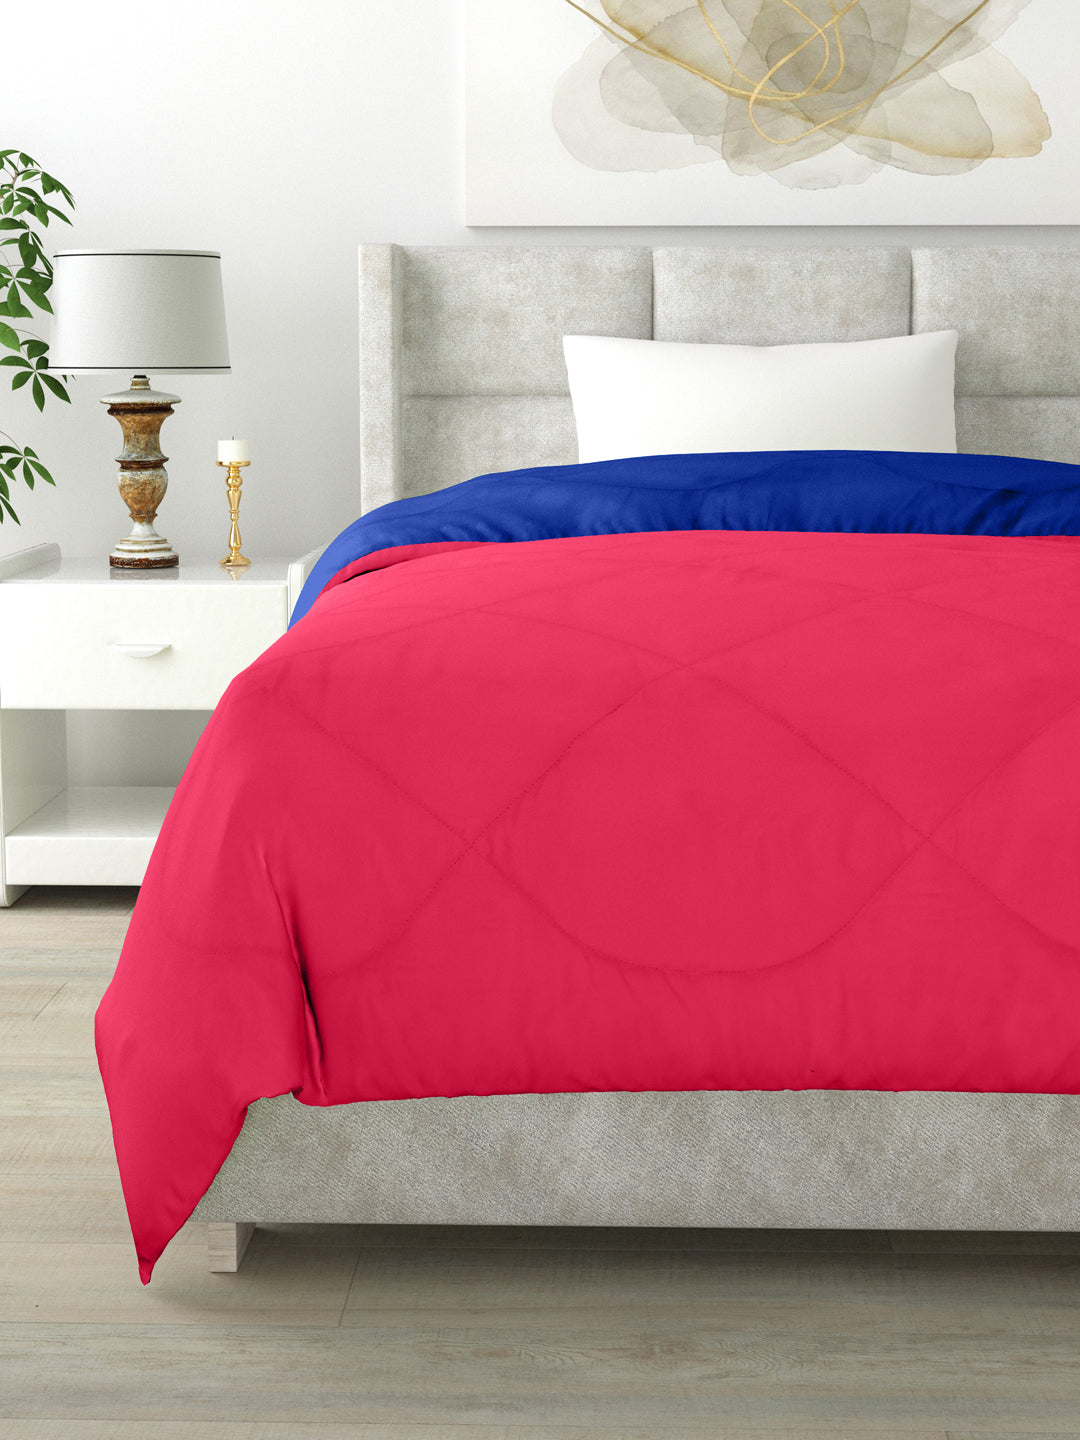 Reversible Single Bed Comforter 200 GSM 60x90 Inches (Blue & Pink)